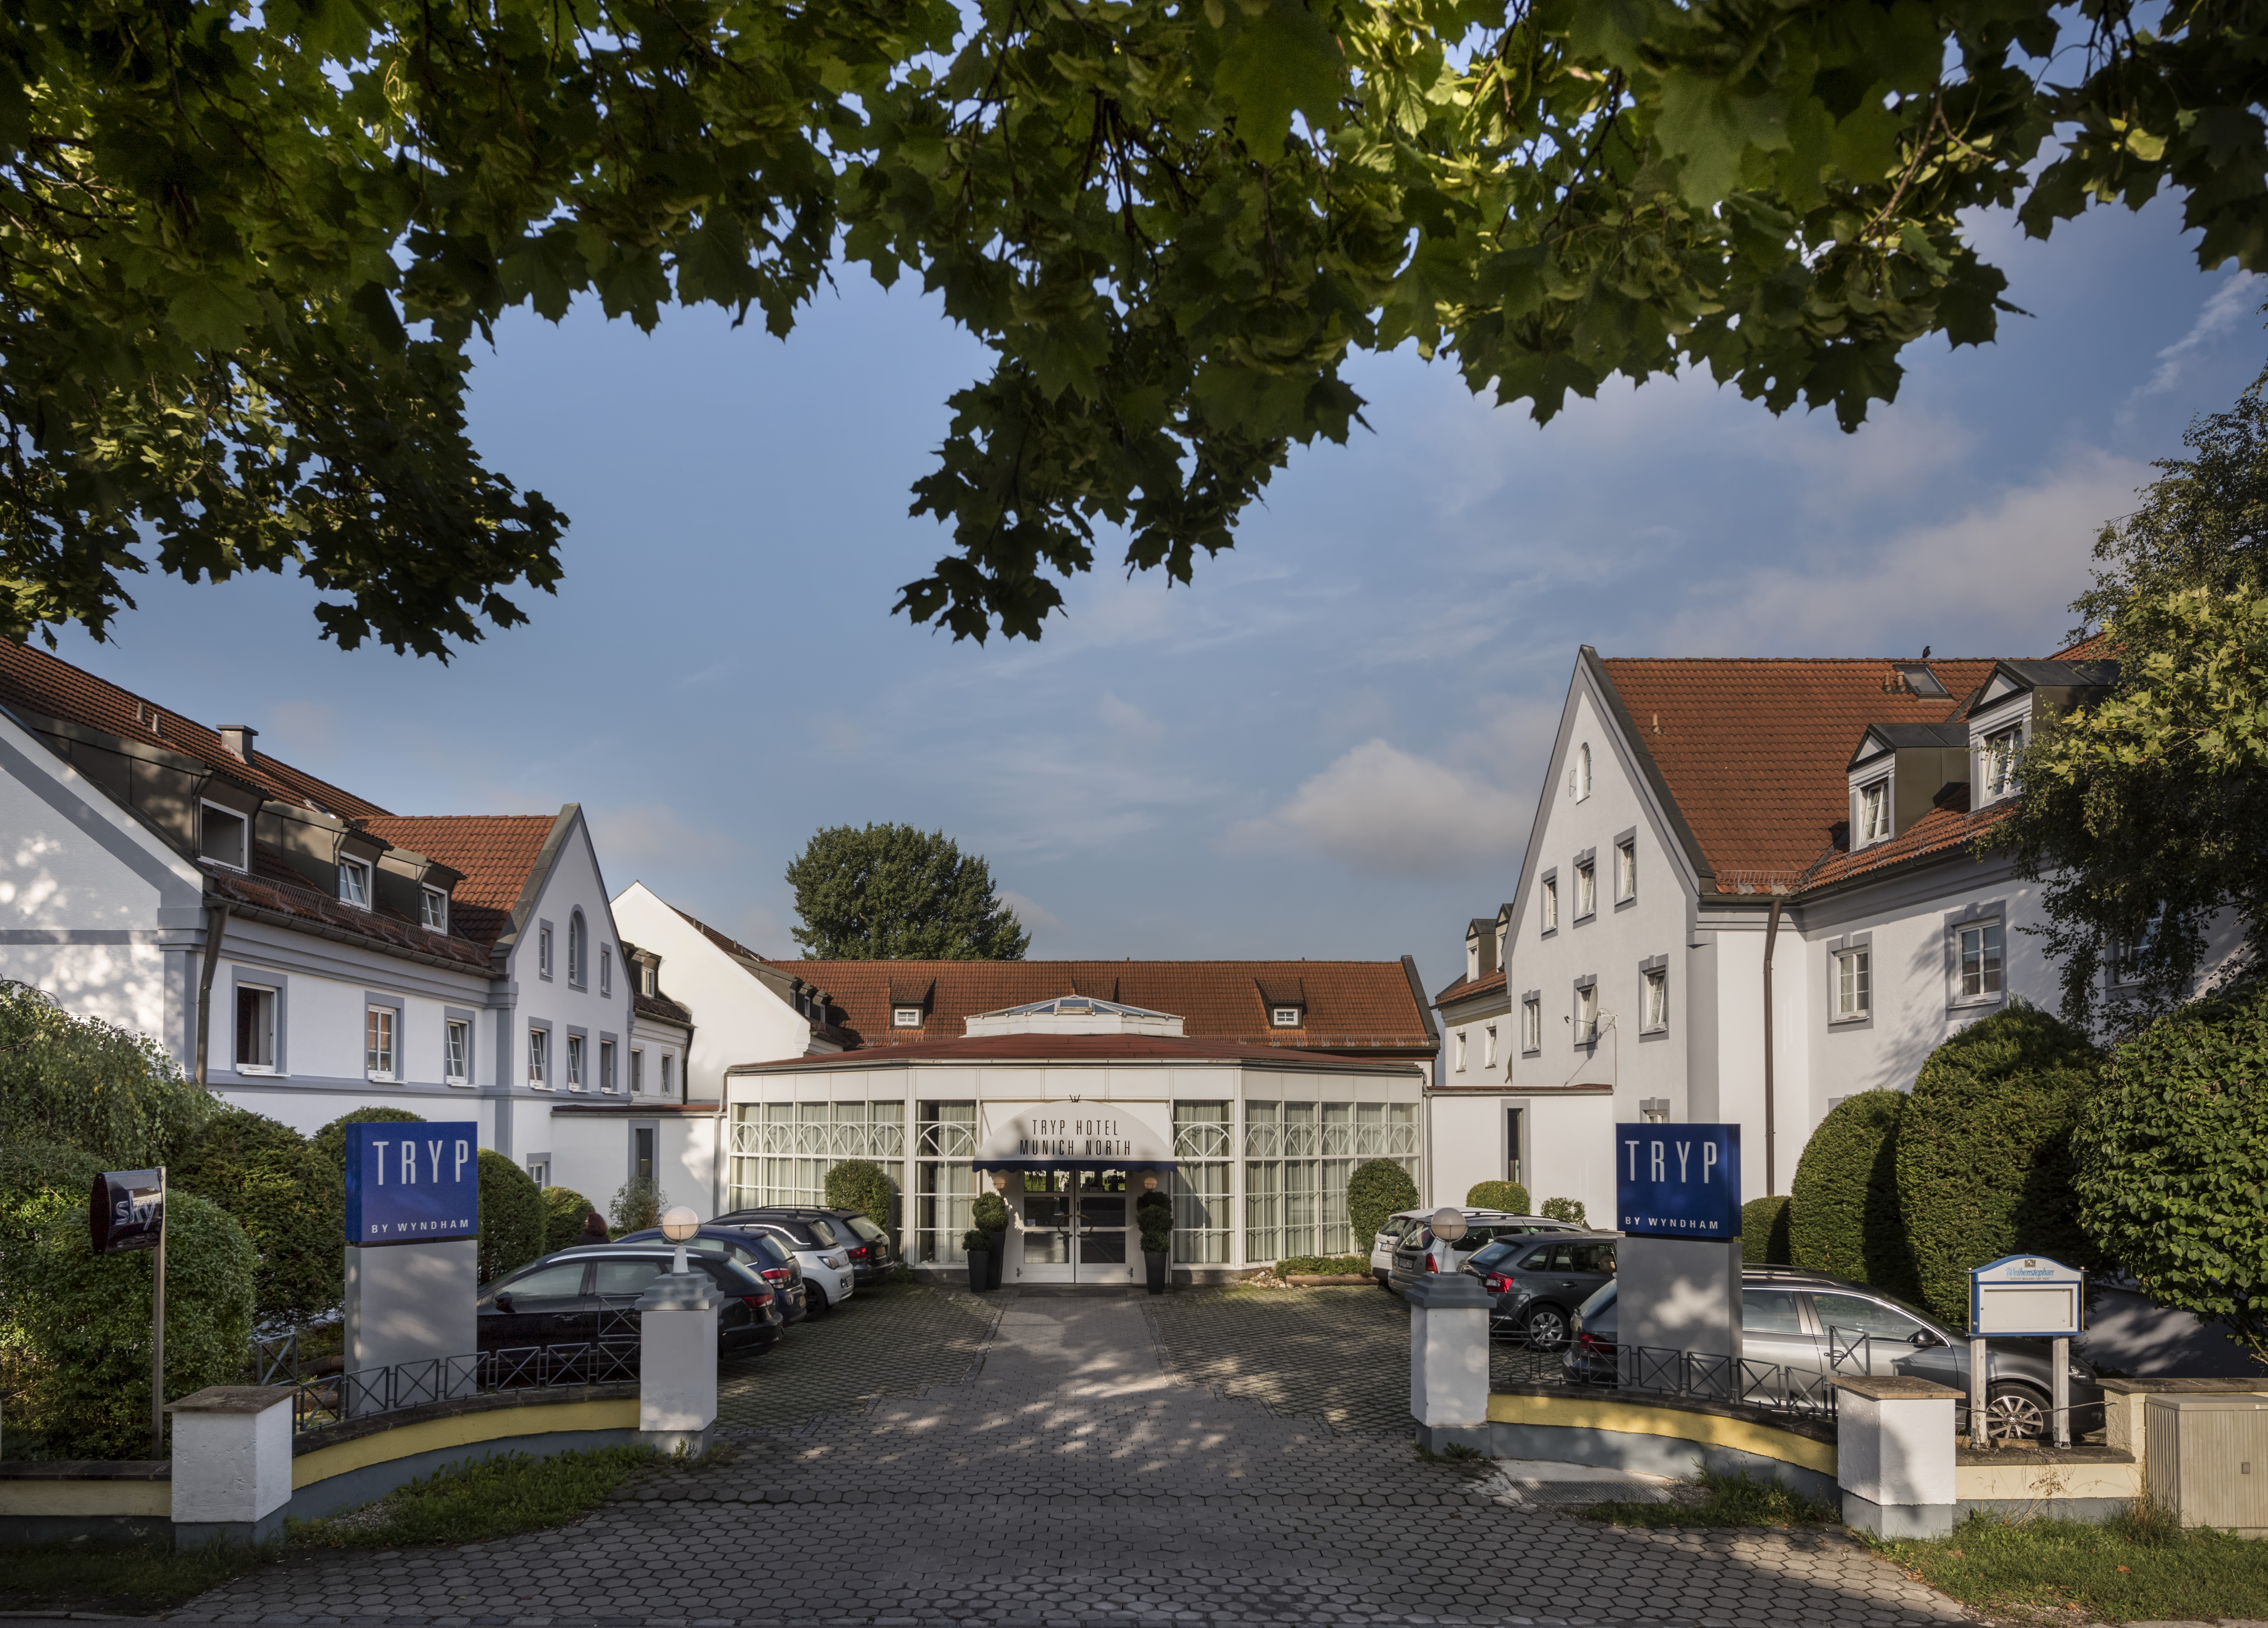 TRYP by Wyndham Munich North <br/>59.00 ew <br/> <a href='http://vakantieoplossing.nl/outpage/?id=85b041d12169529a32611a83824a33f9' target='_blank'>View Details</a>